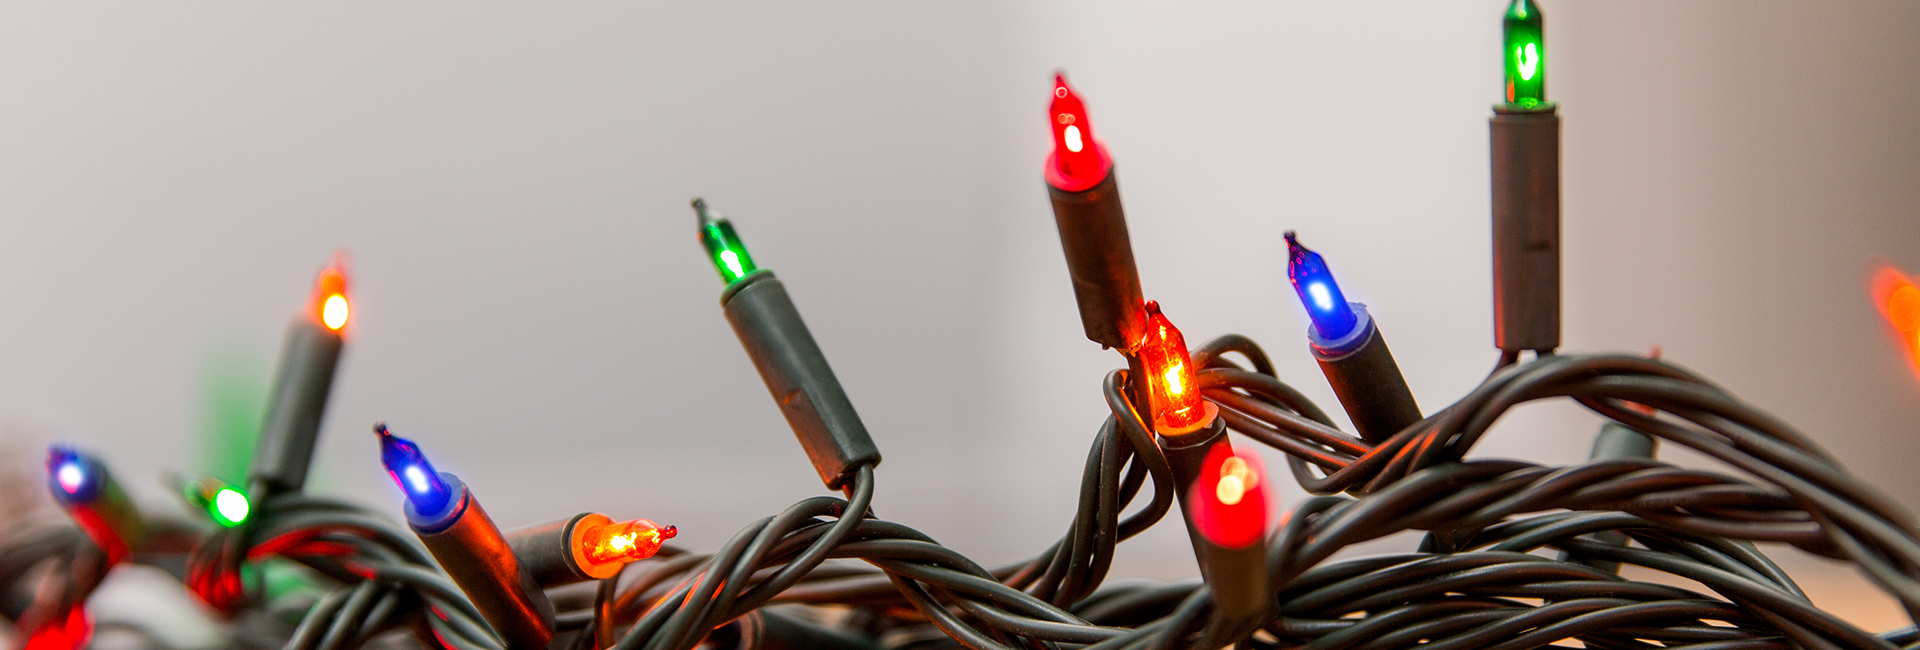 Let CORE recycle your unwanted holiday lights